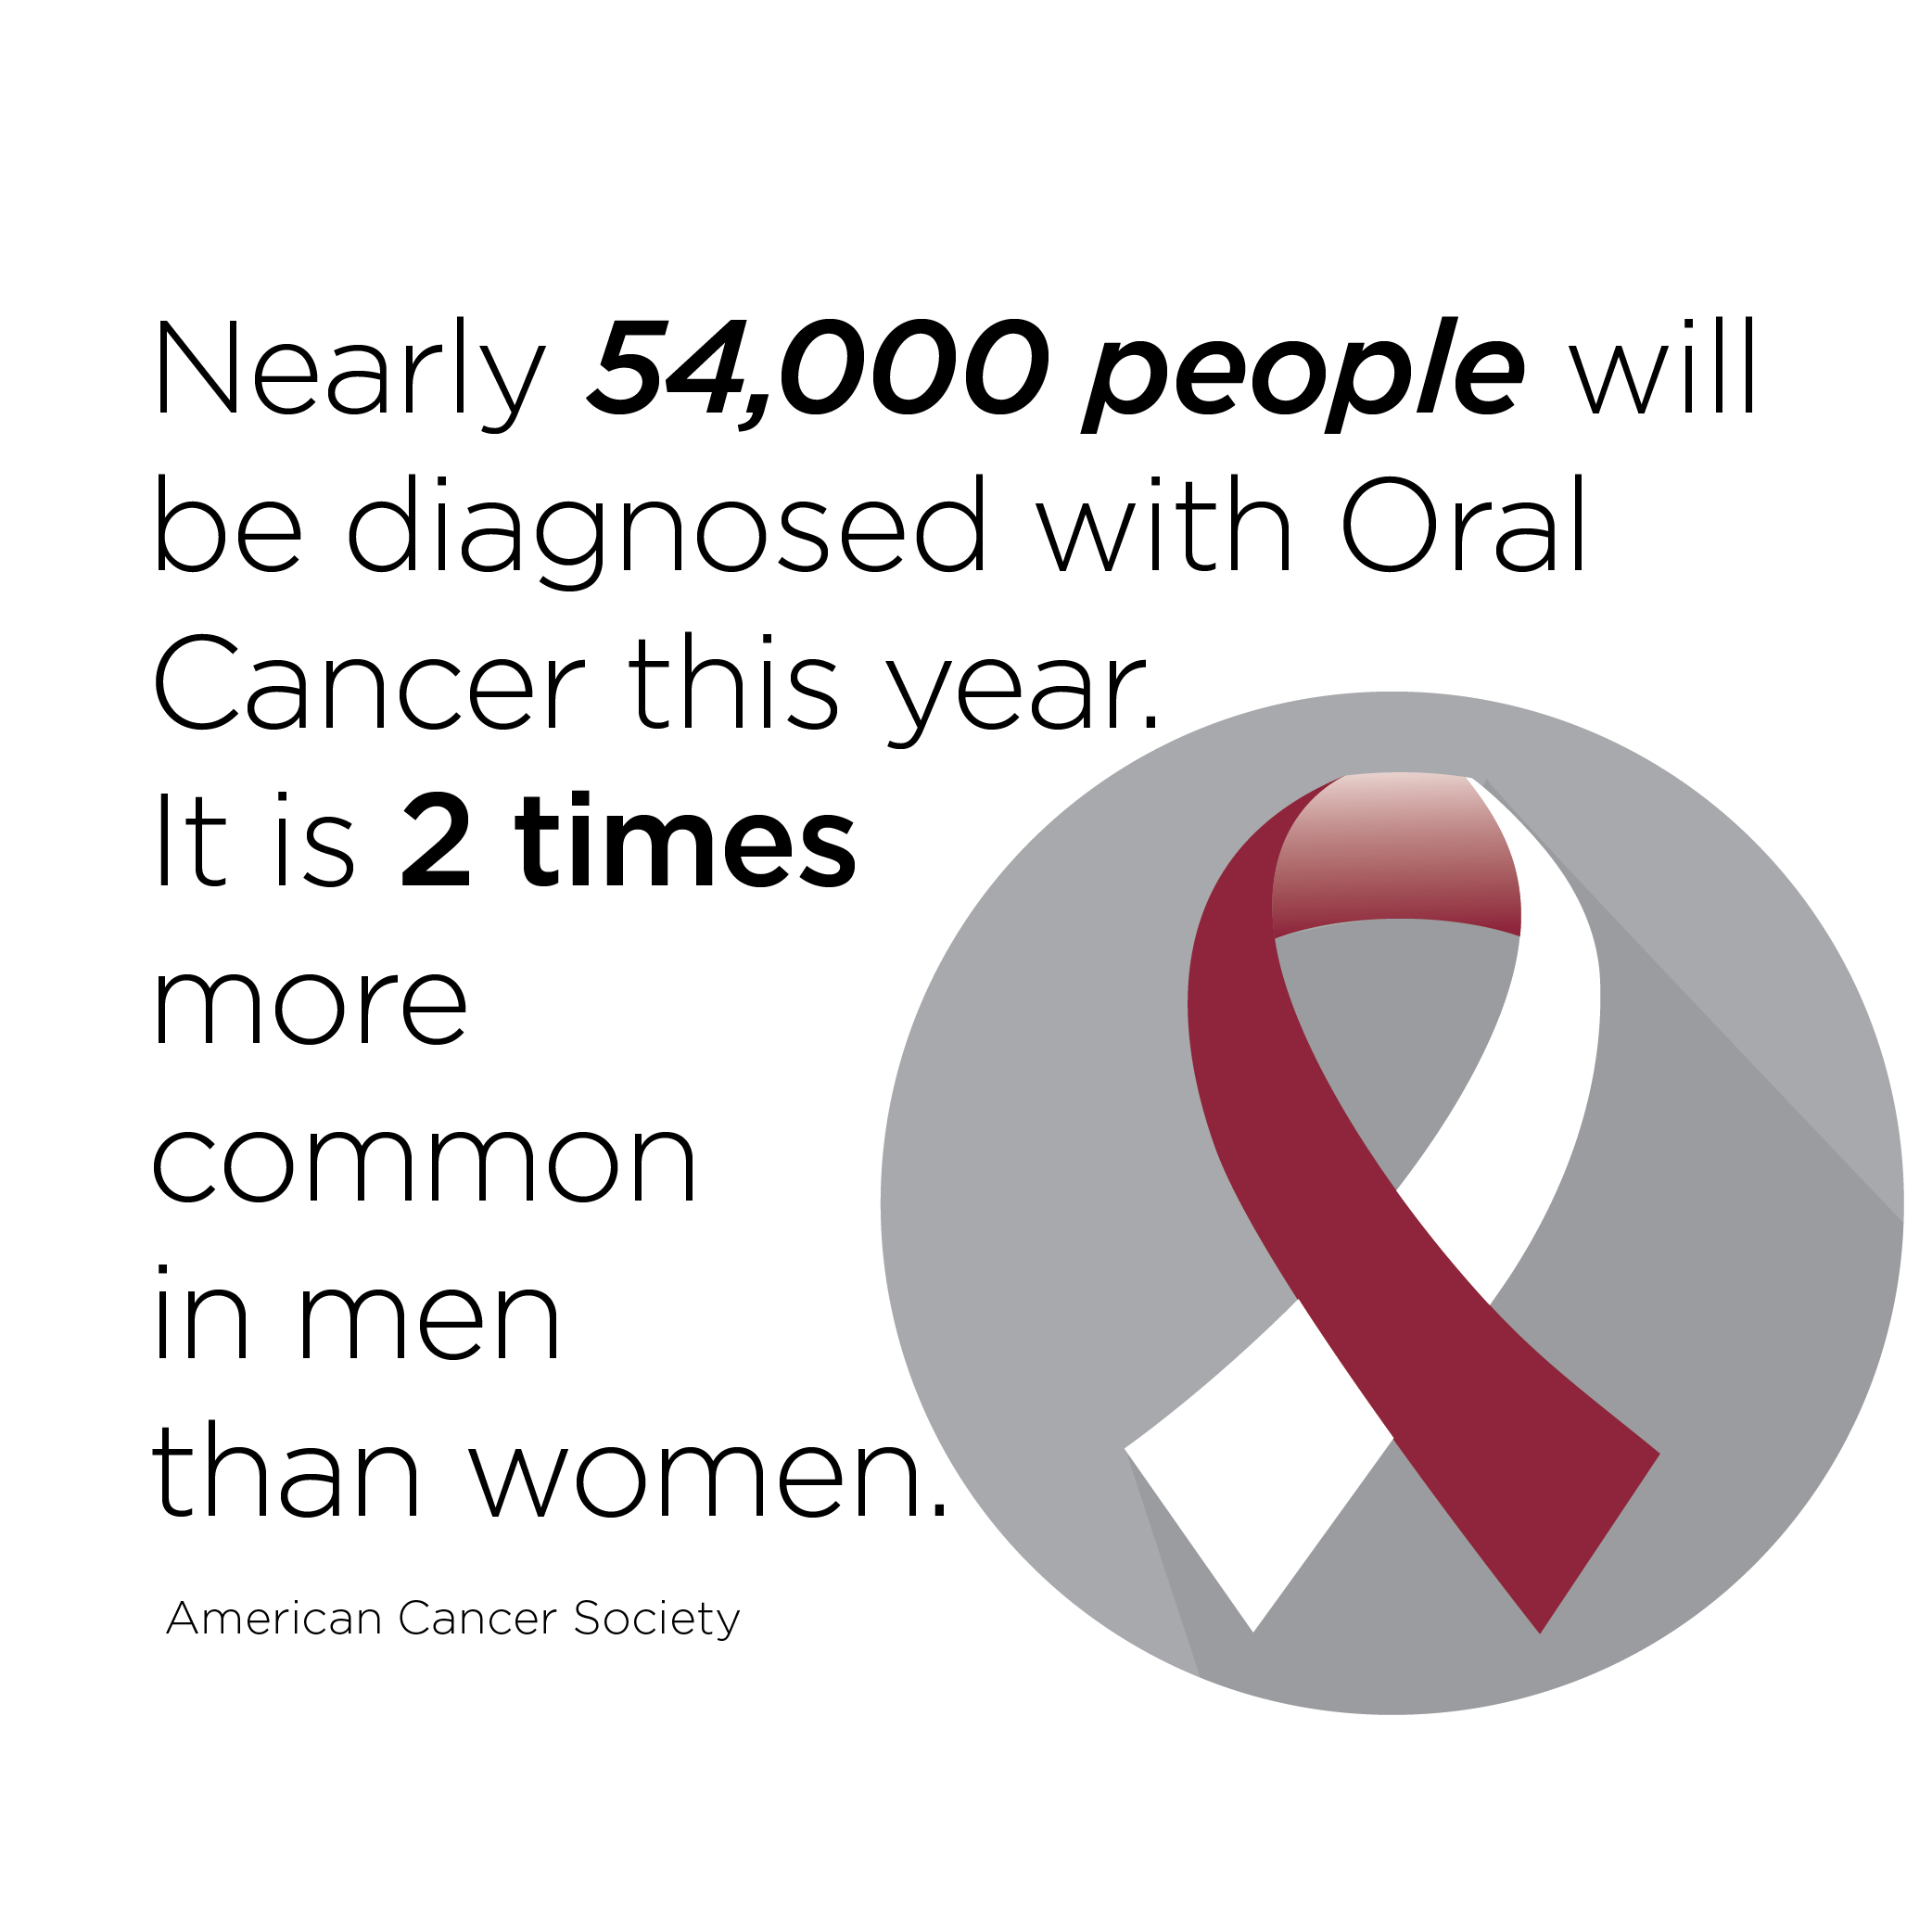 Illustration of Oral Cancer Awareness ribbon which is burgundy and white. 
Text states: "Nearly 54,000 people will be diagnosed with oral cancer this year. It is 2 times more common in men than women." 